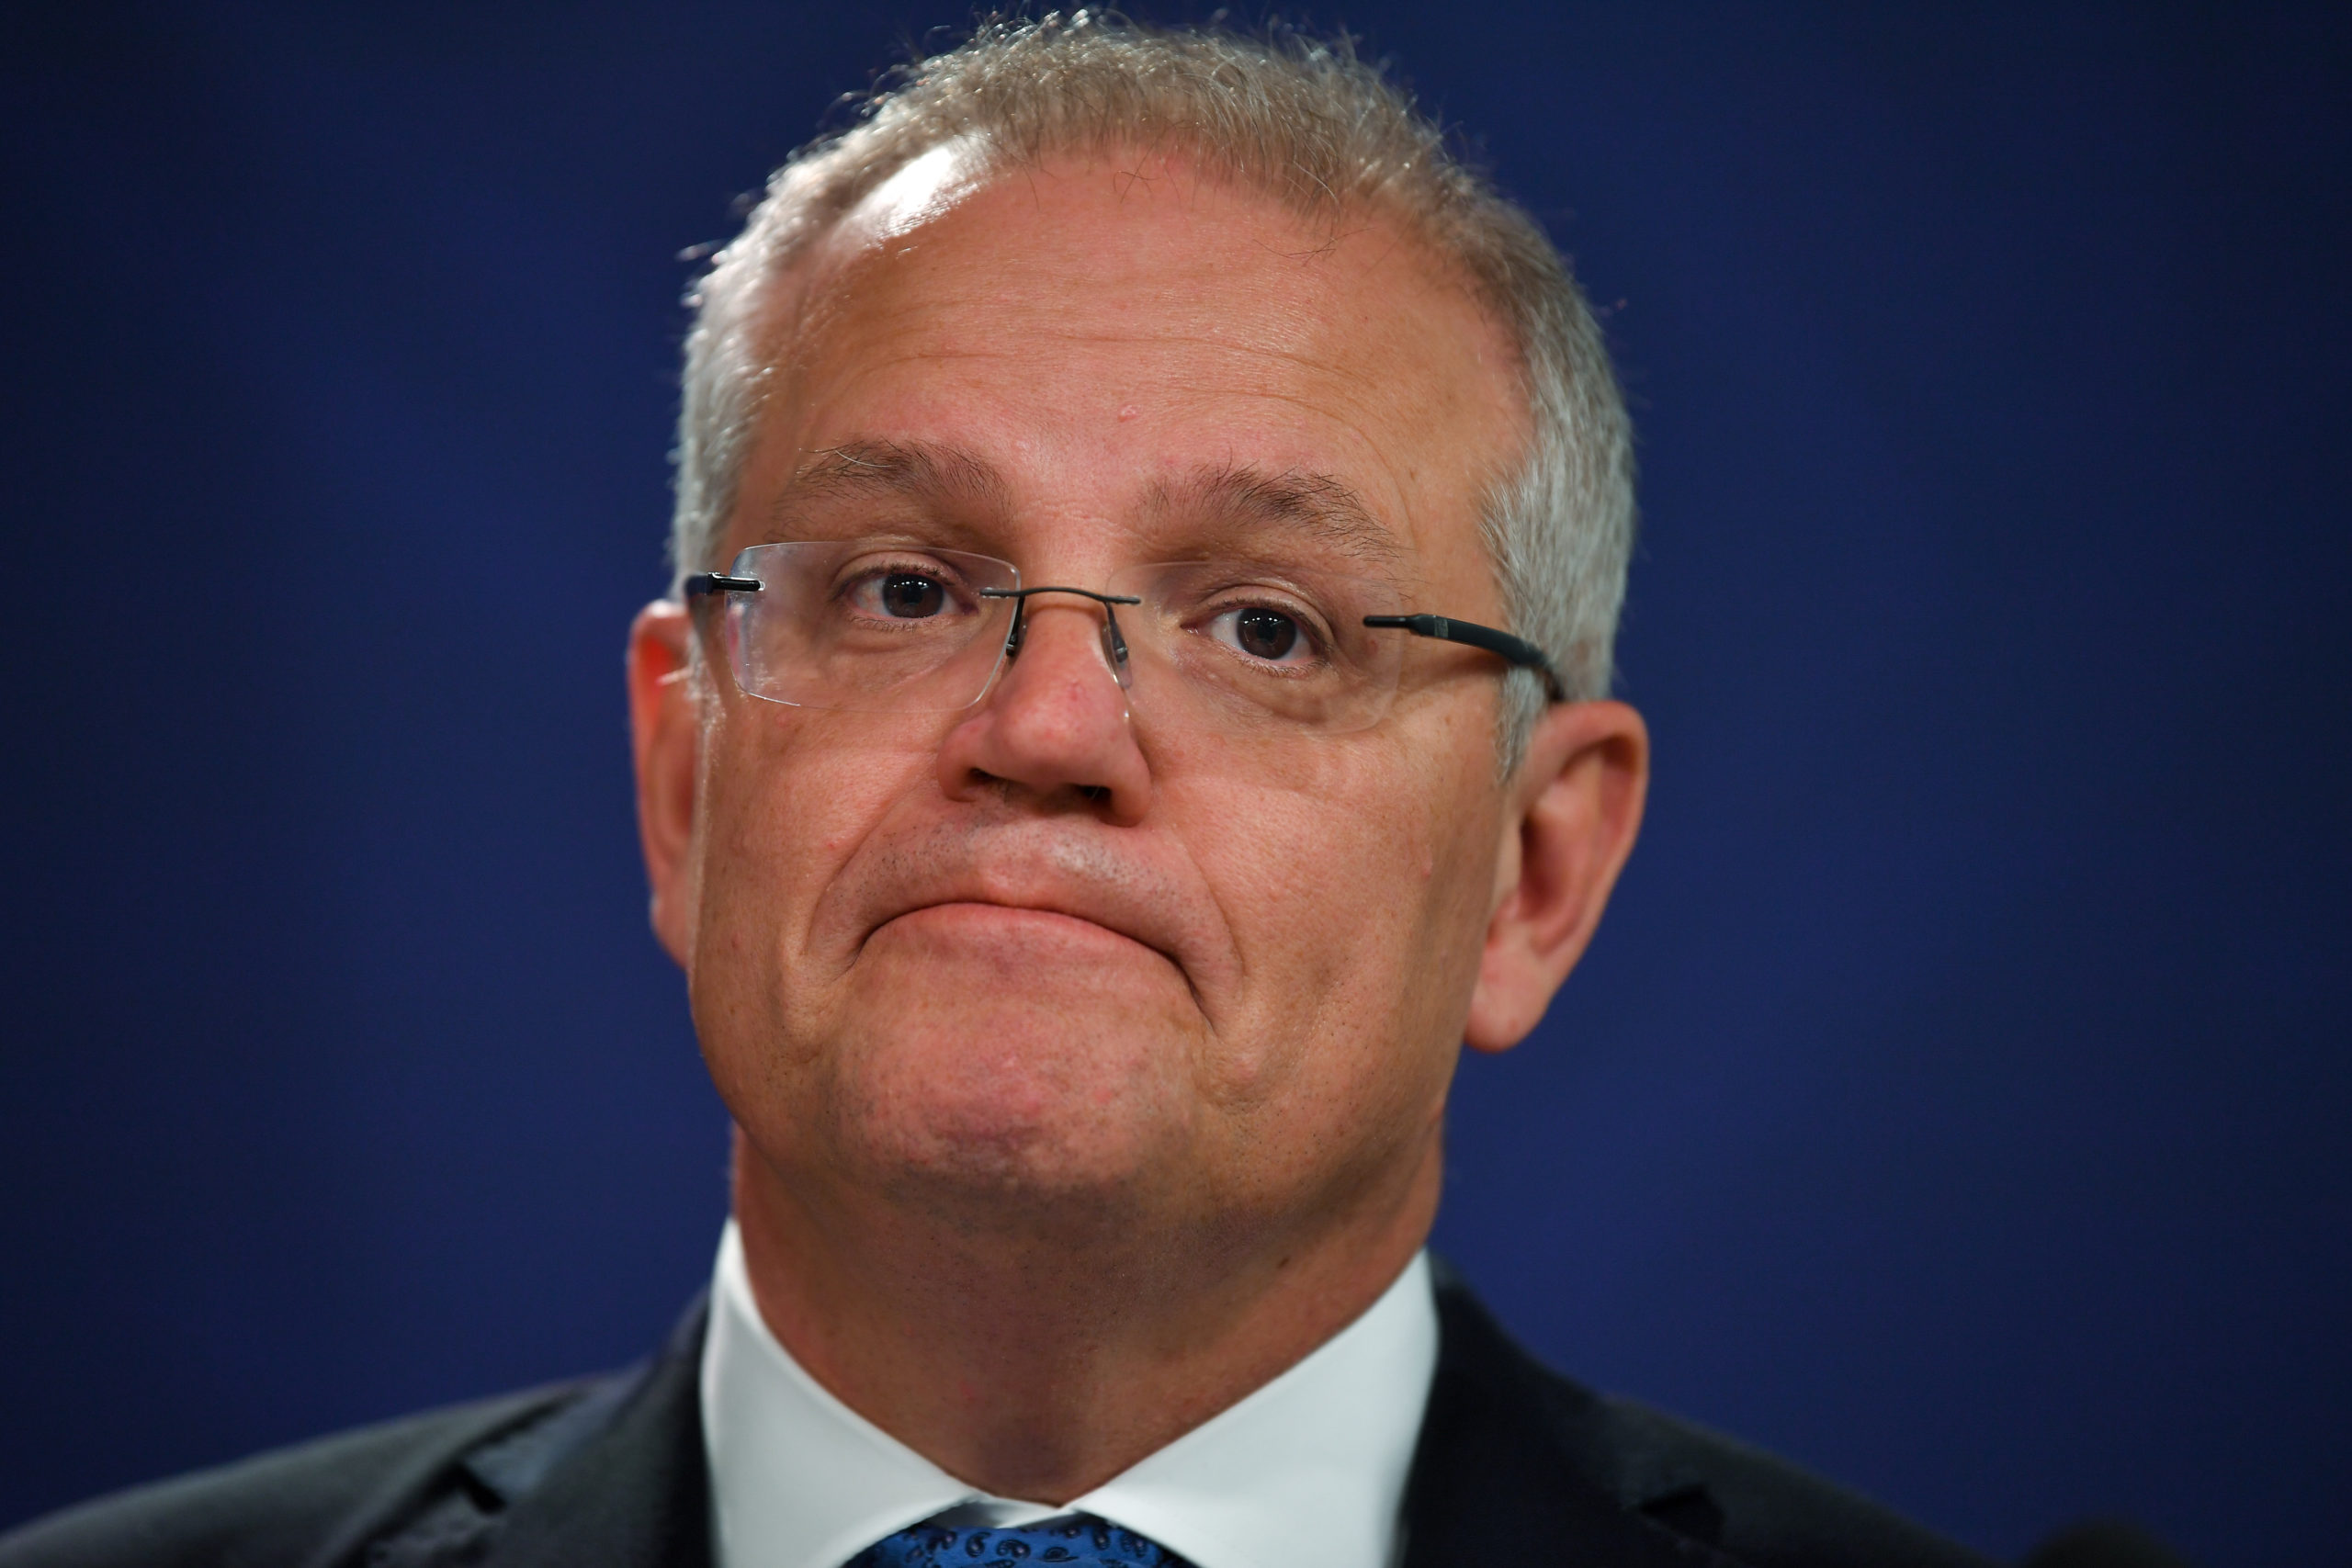 Morrison Ends Own Press Conference After Climate Q’s And Pressure On Fire Response